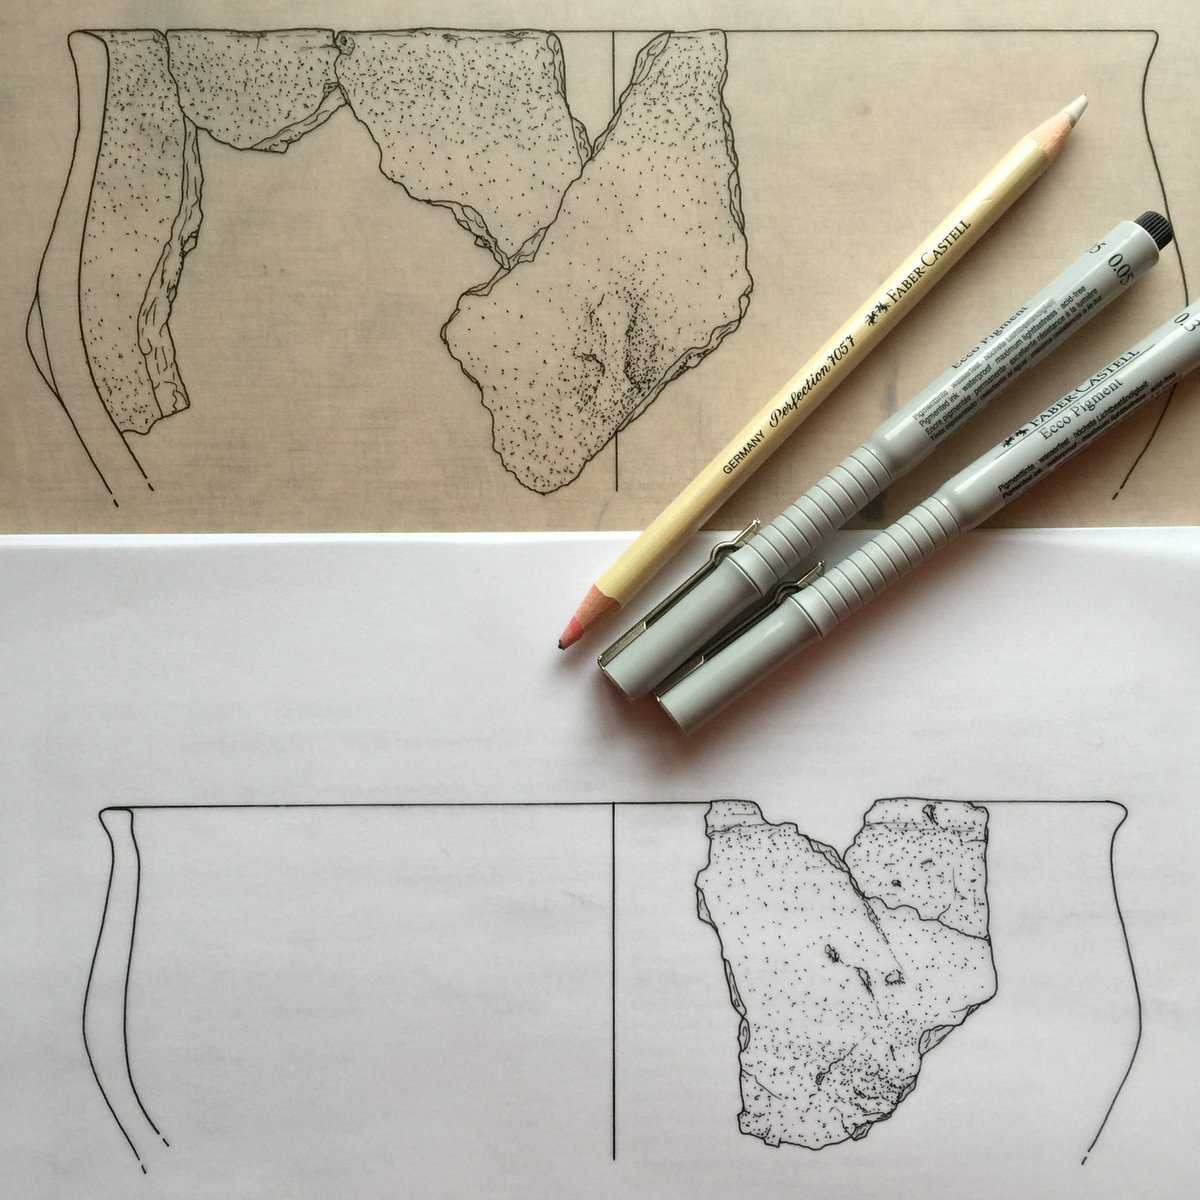 Wednesday drawings...
simple but beautiful bowls, some with handles.
#ArchIllu #archaeologicalillustration #illustrator #archaeologicalfinds #drawingdesk #archaeologylife  #womeninscience #drawingdiary #pottery #businesslove #drawingdaily